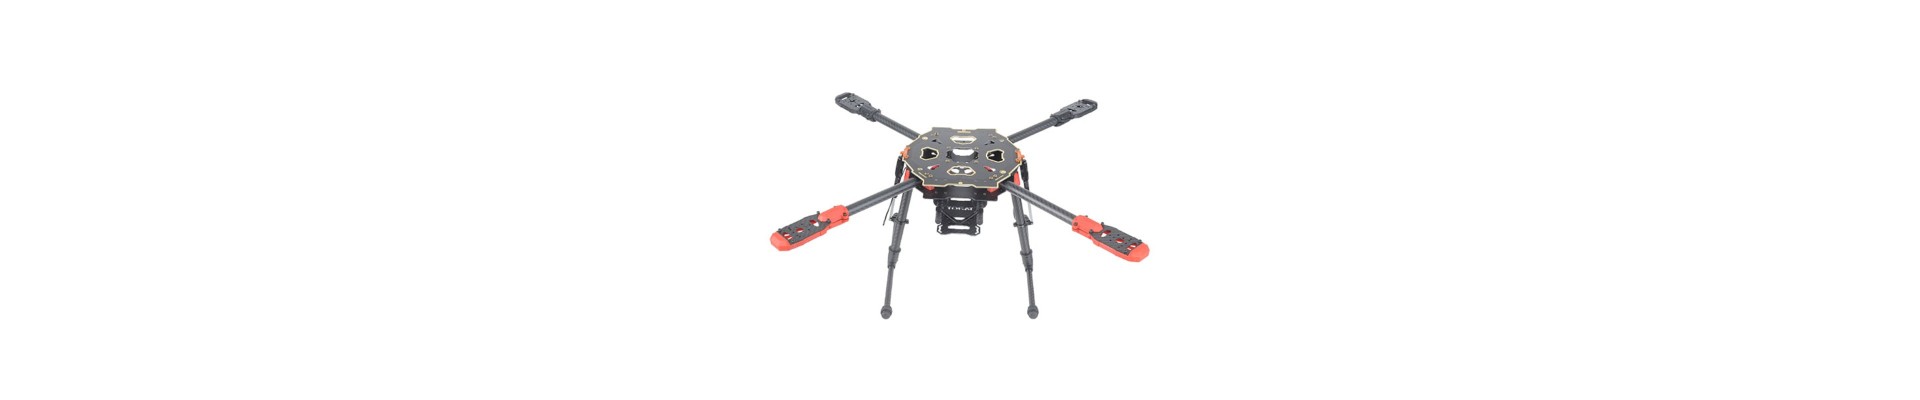 RC Multicopter